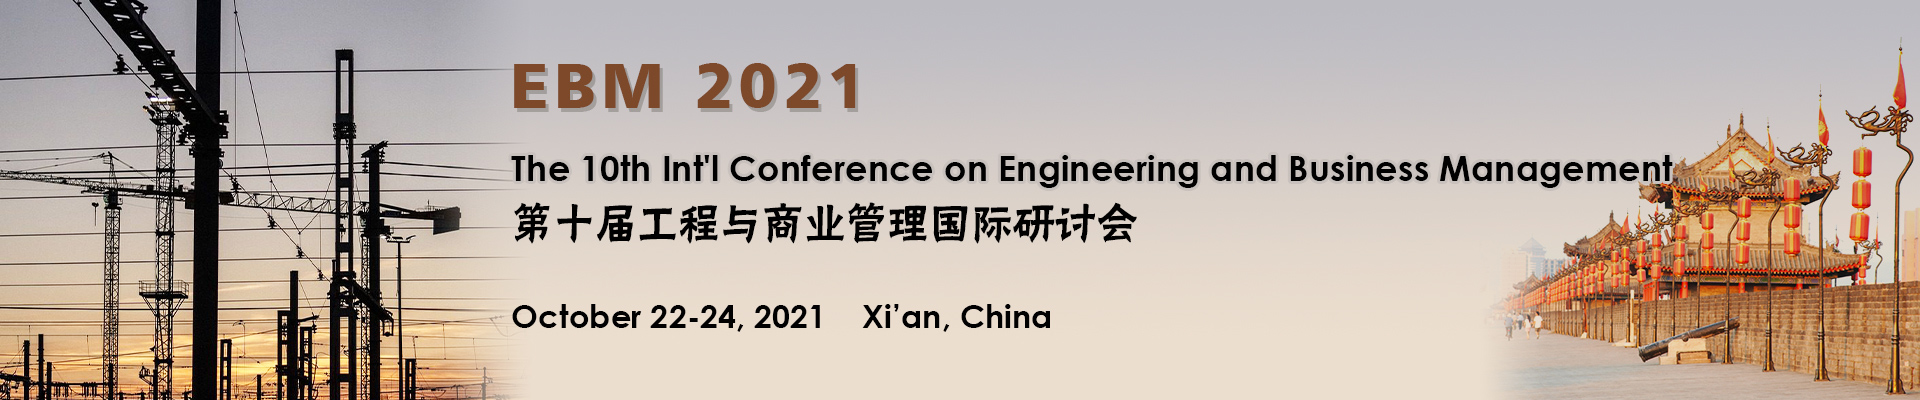 The 10th Int'l Conference on Engineering and Business Management (EBM 2021), Xi'an, Shaanxi, China